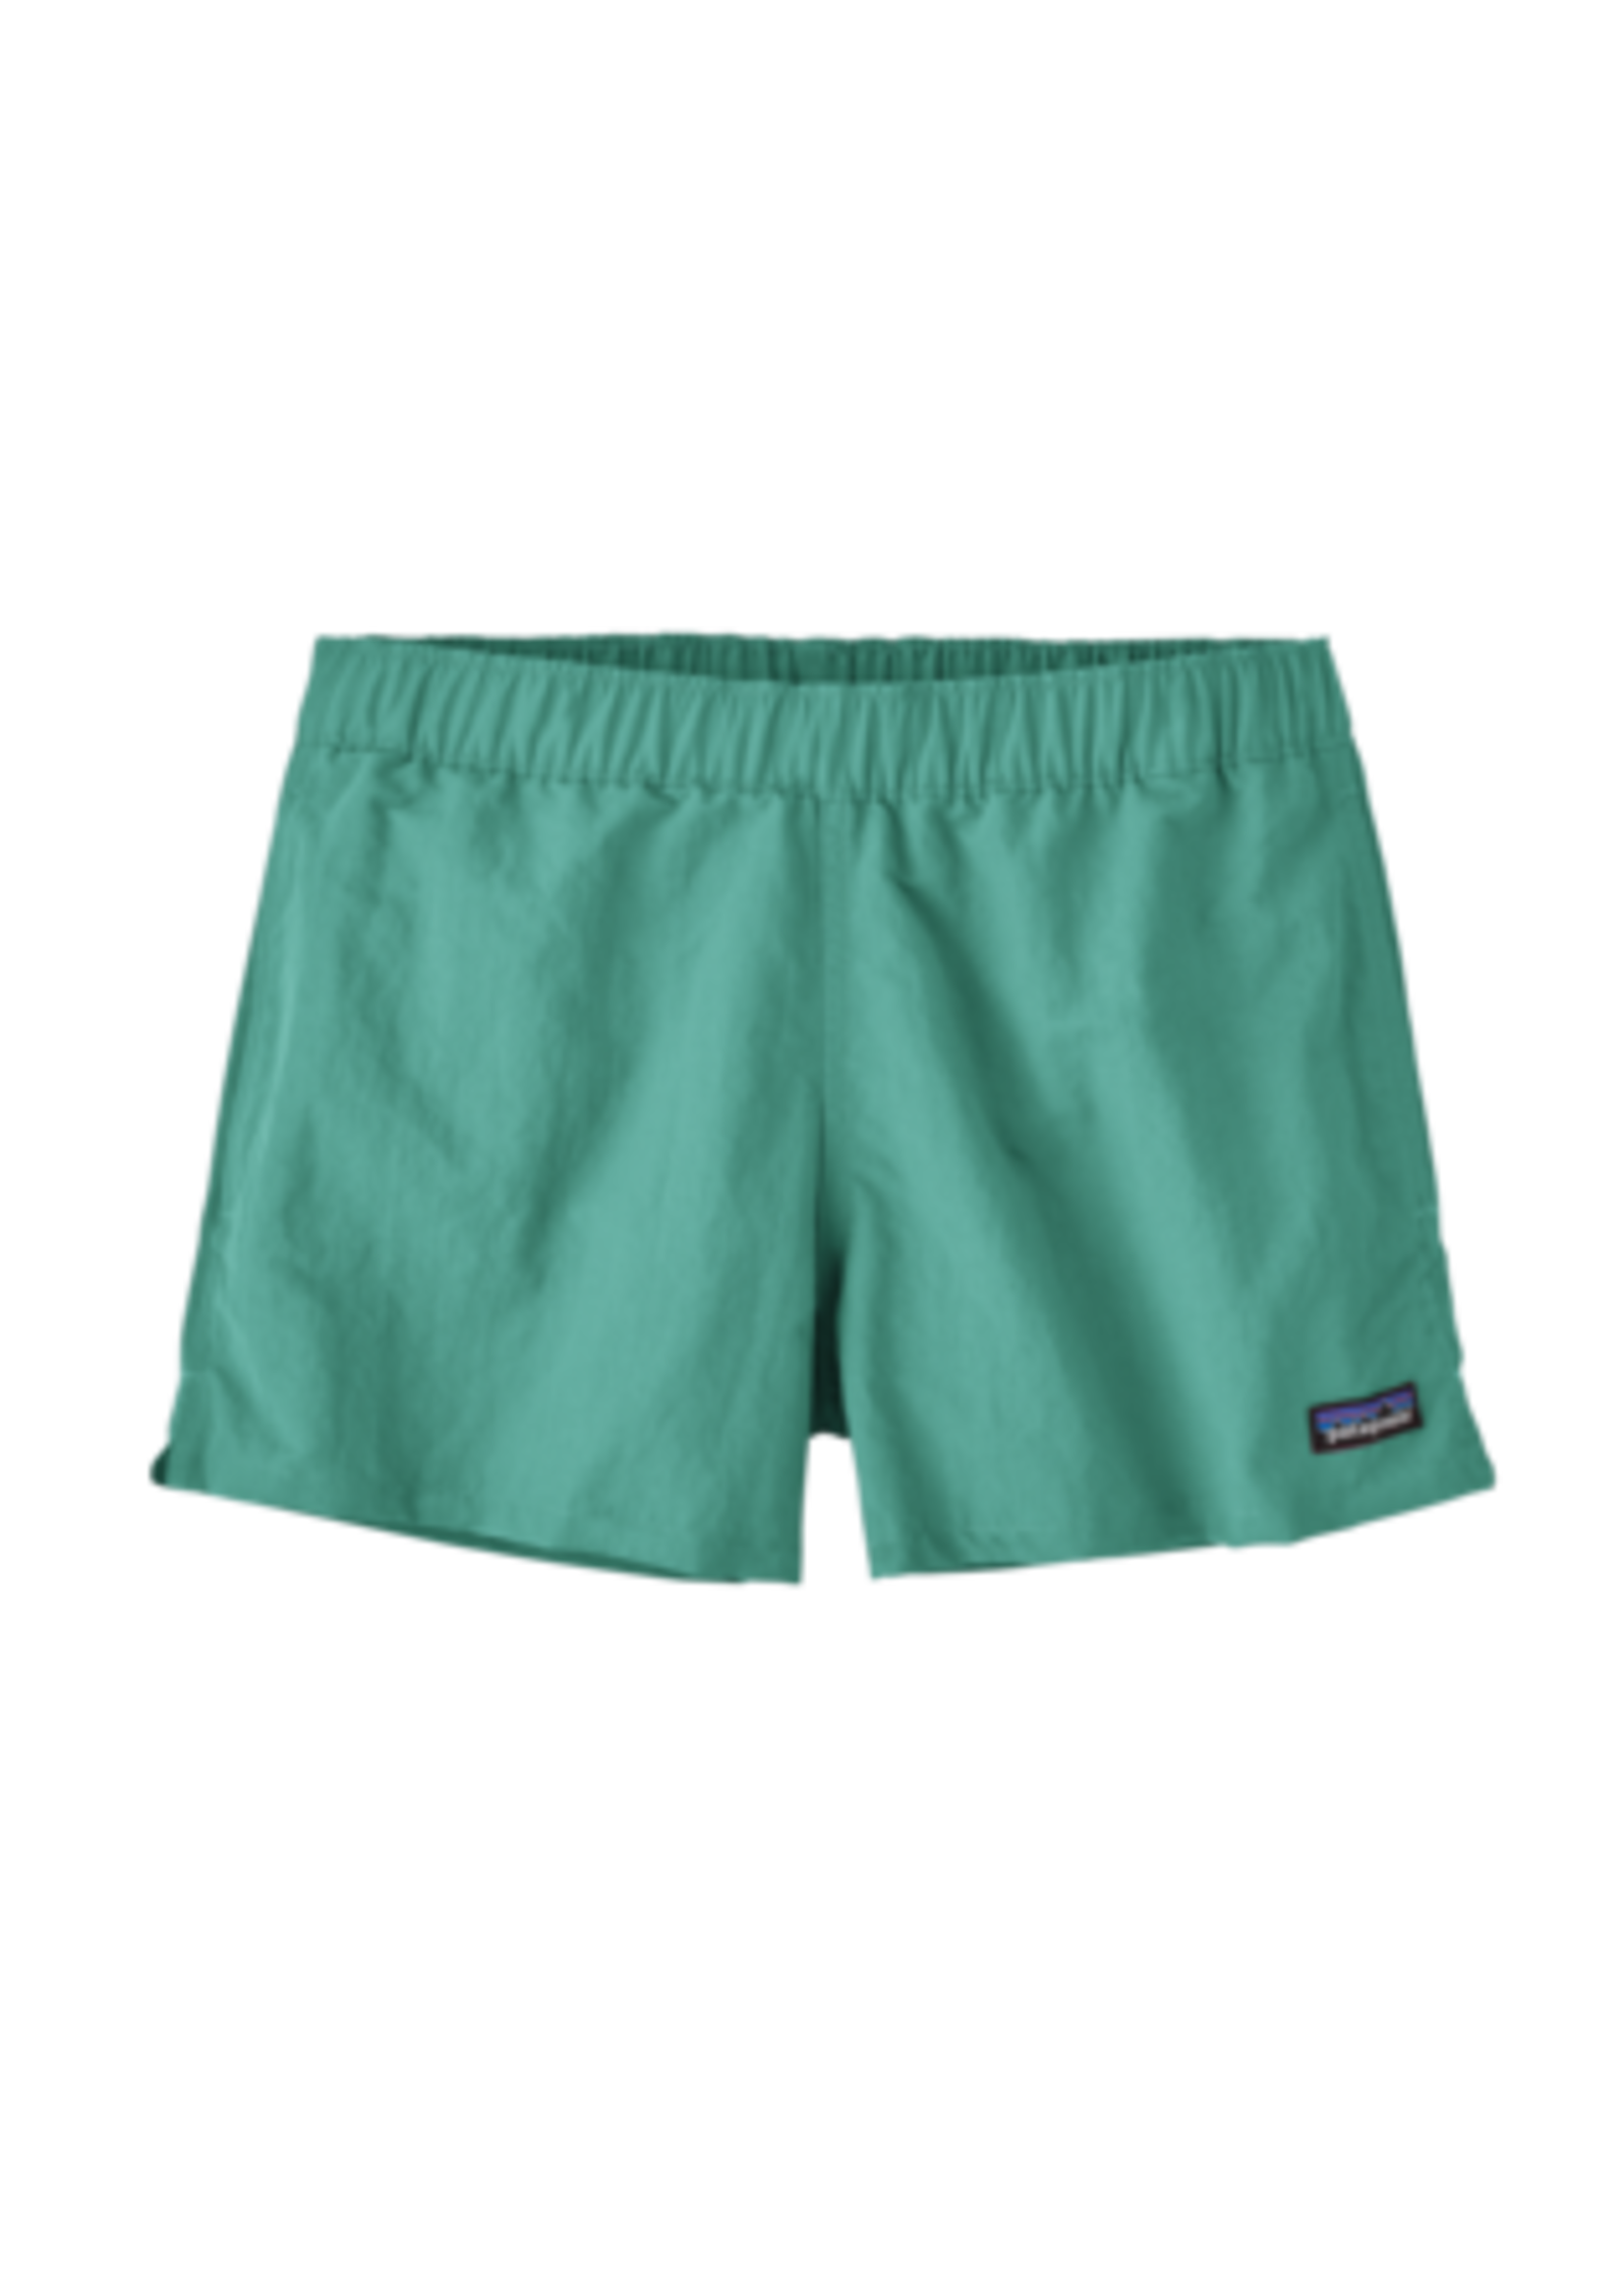 Patagonia W's Barely Baggies Shorts - 2 1/2 in. - Fresh Teal